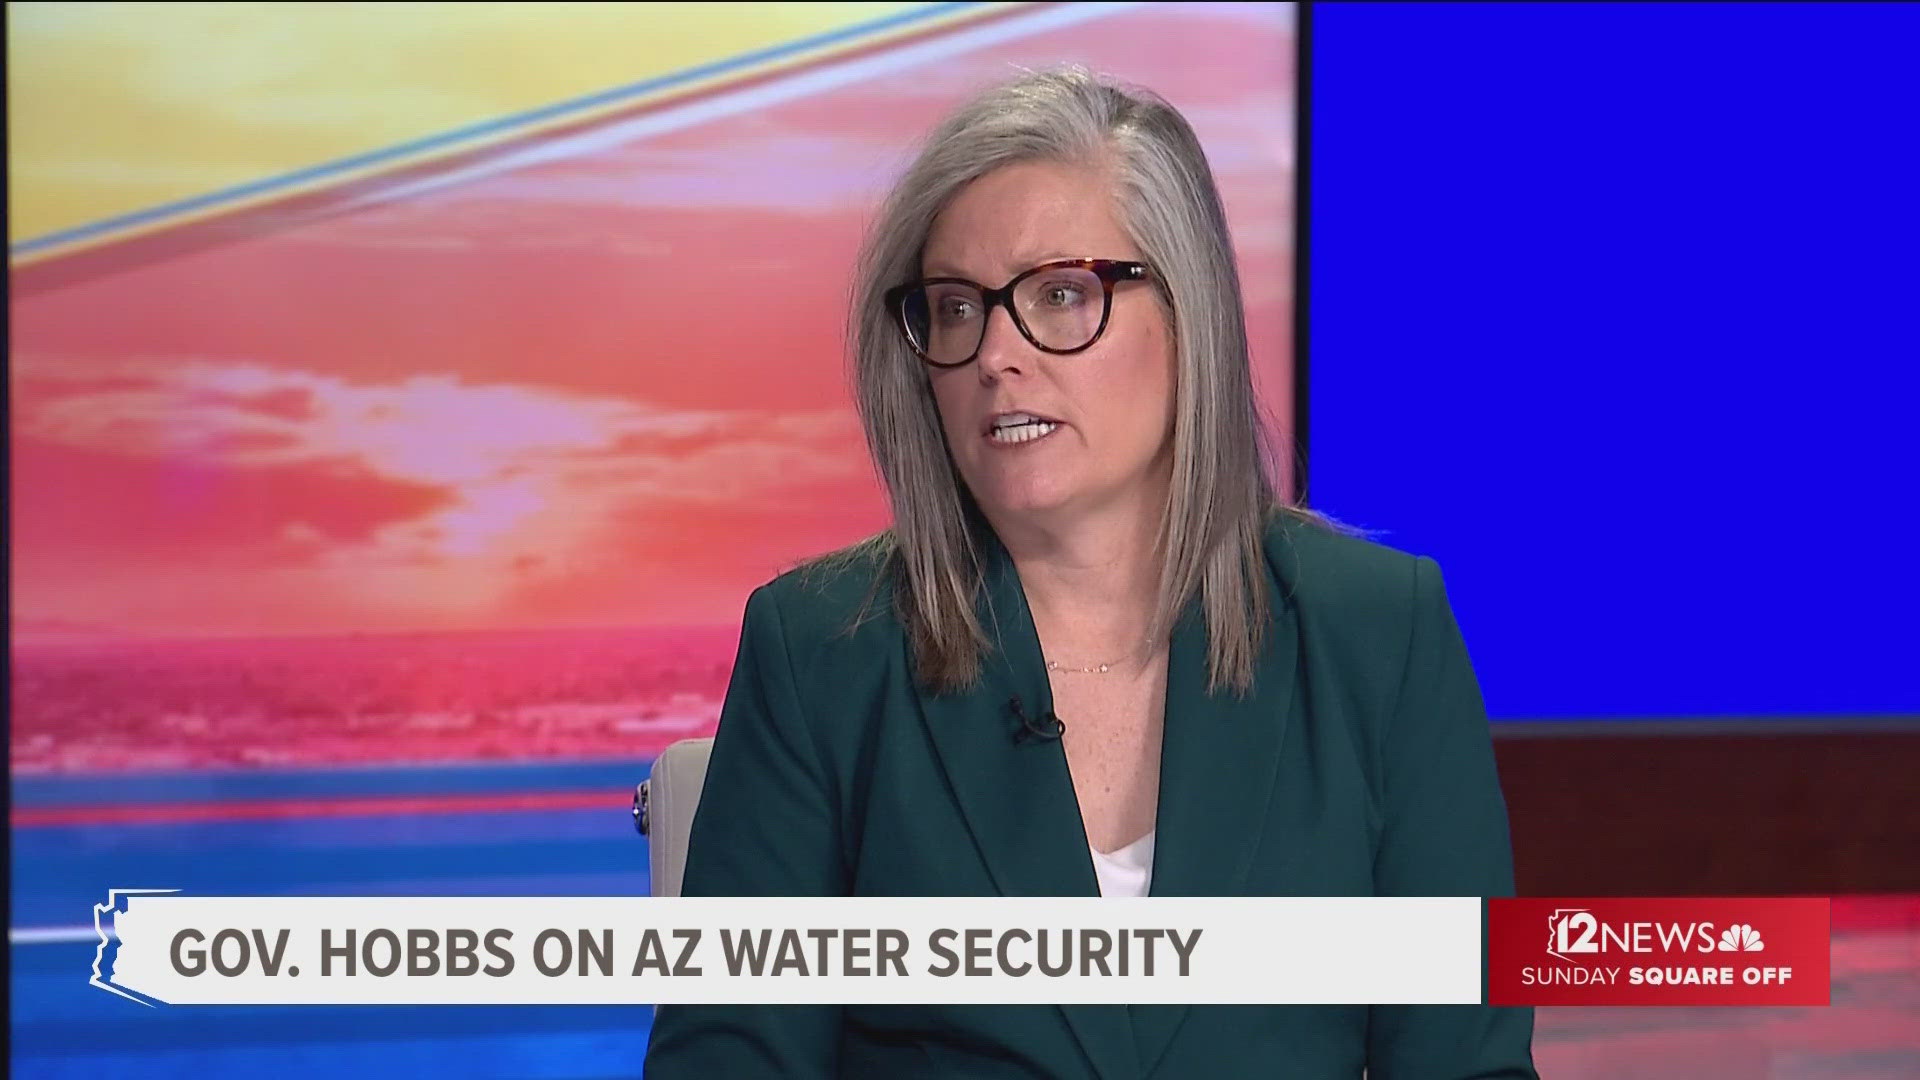 Arizona Gov. Katie Hobbs gives her reaction to President Joe Biden's weak debate performance, discusses the legislative session that just ended, and more.